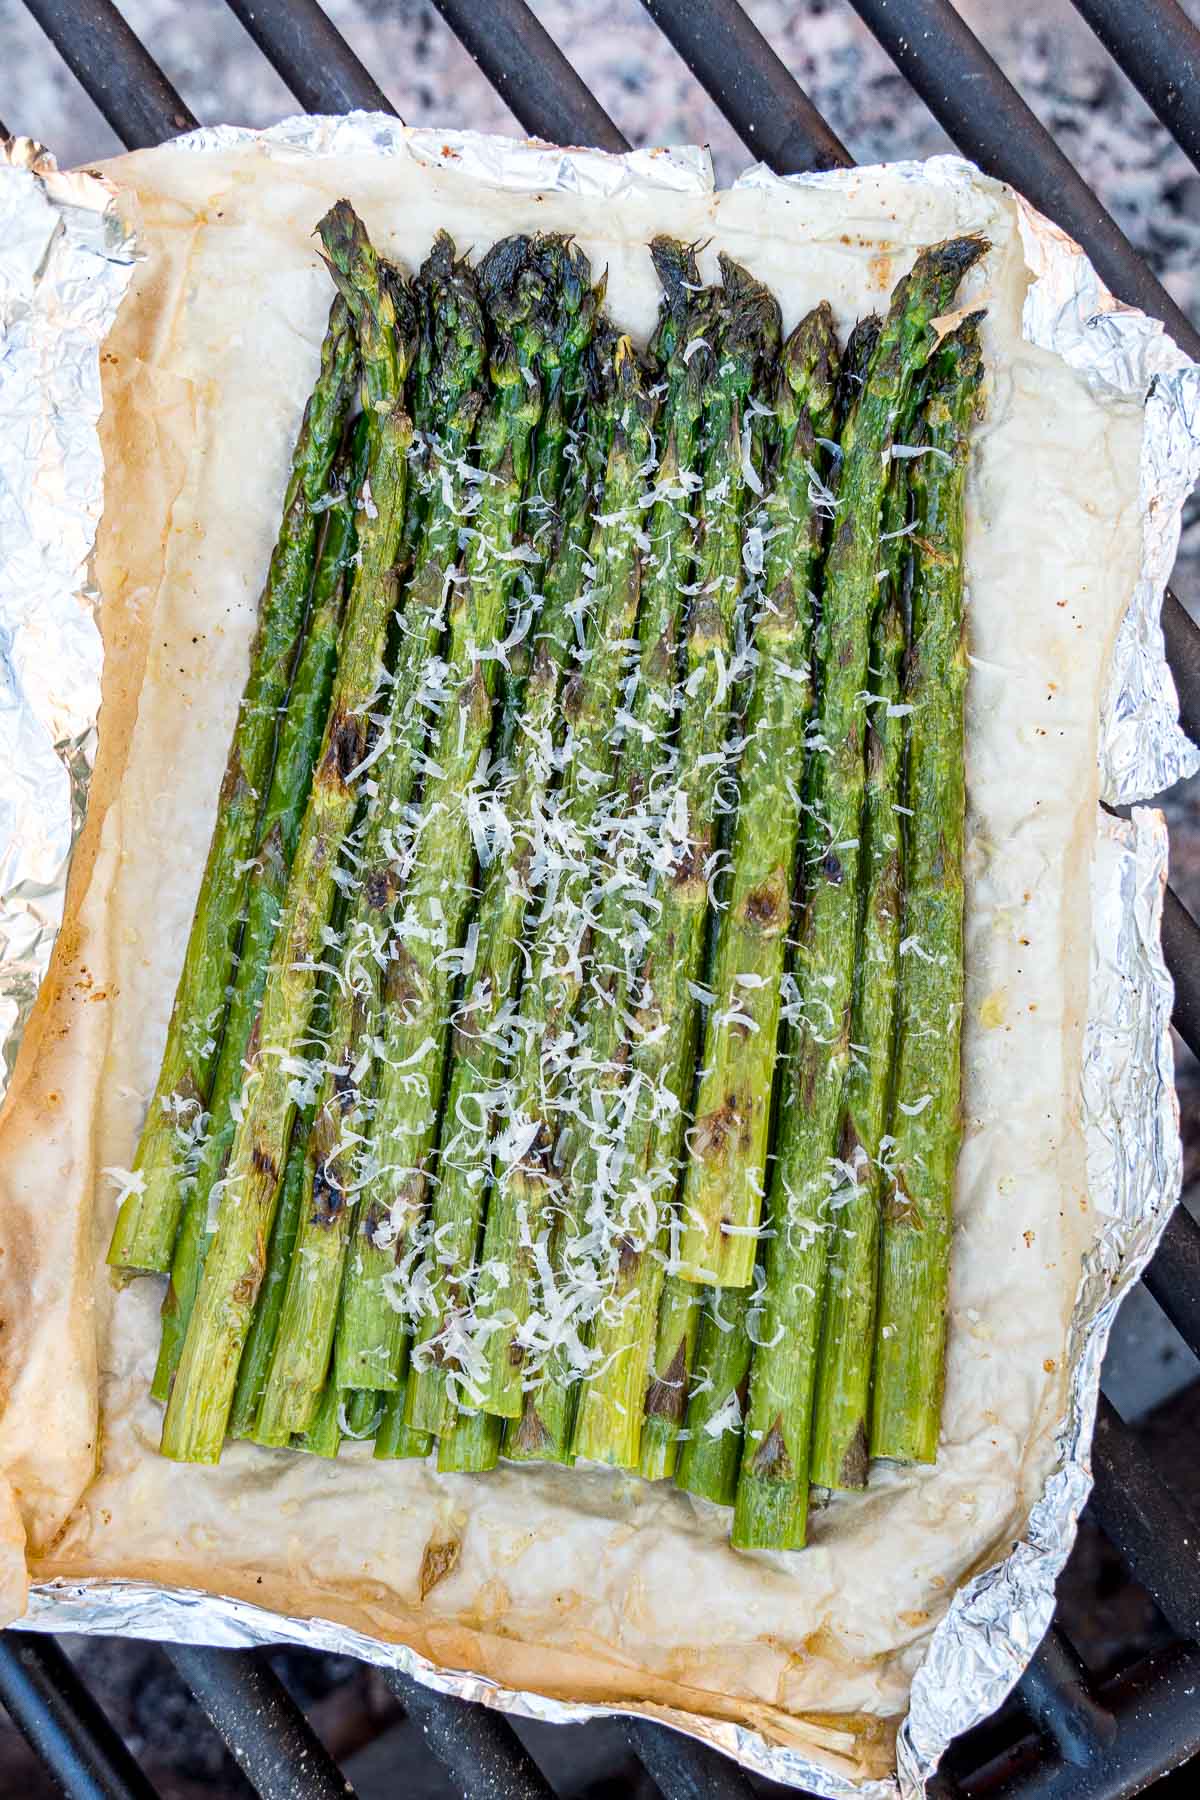 Grilled asparagus in foil over a grill grate